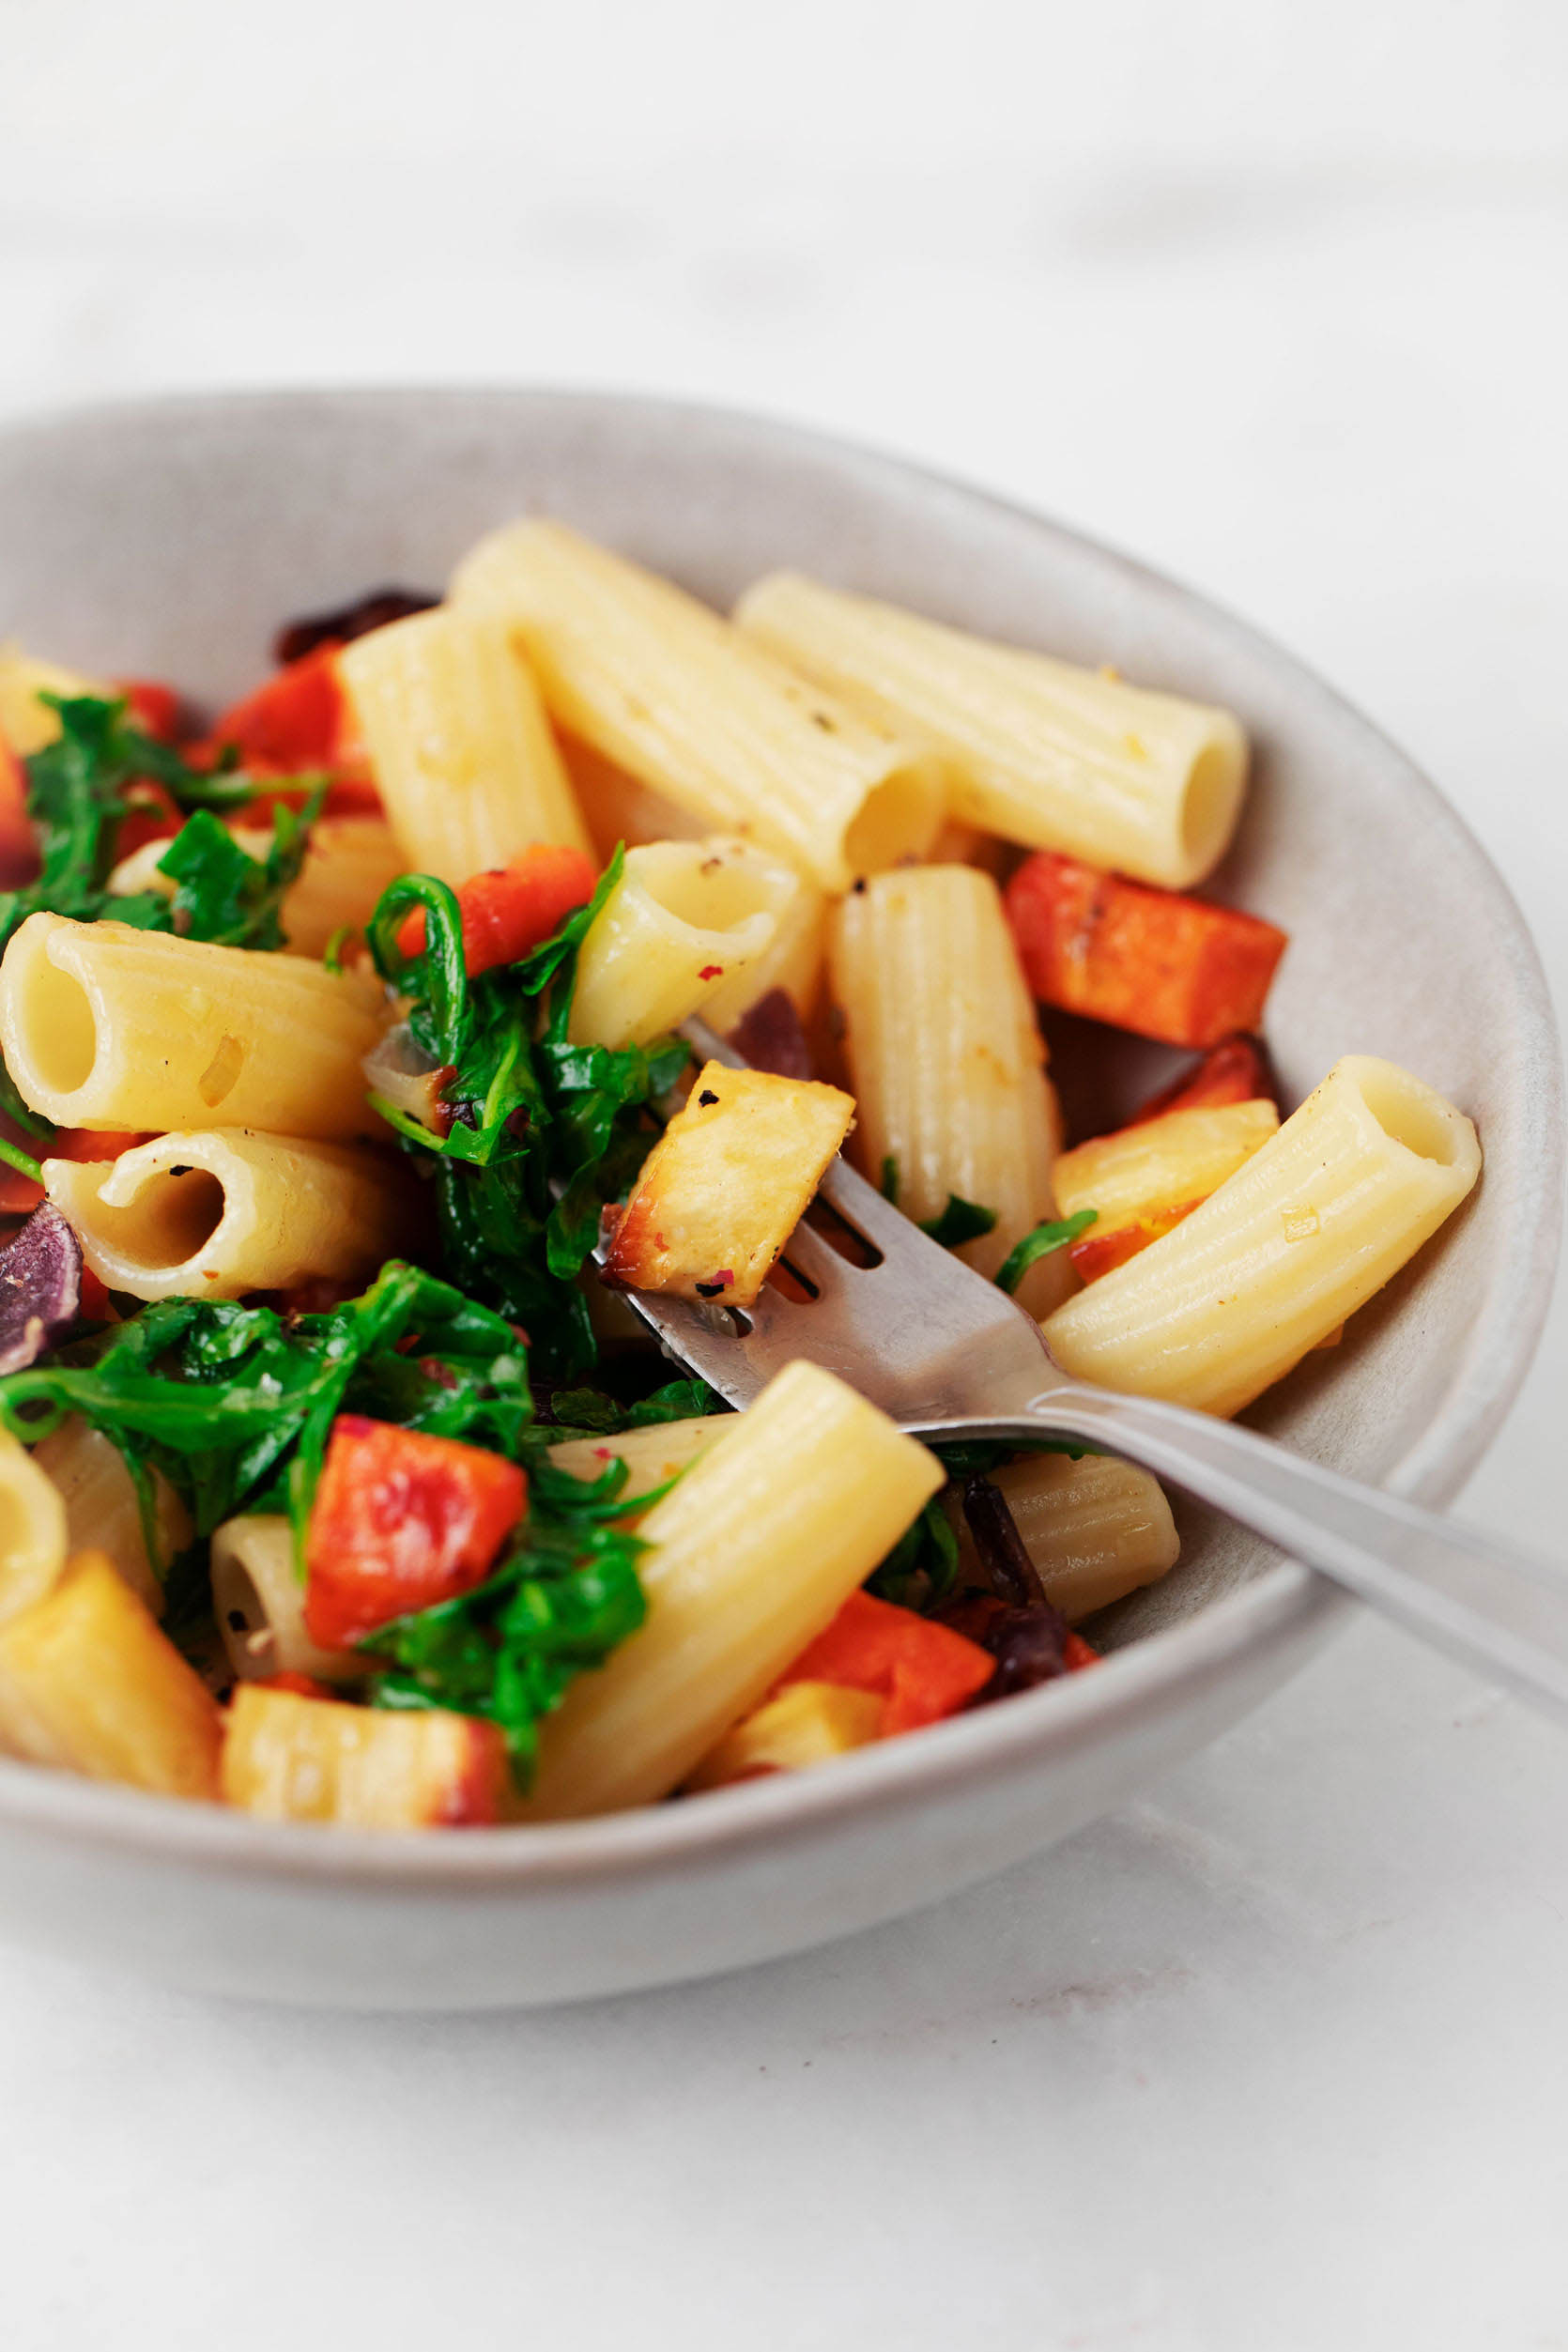 Balsamic Roasted Vegetable Pasta | The Full Helping